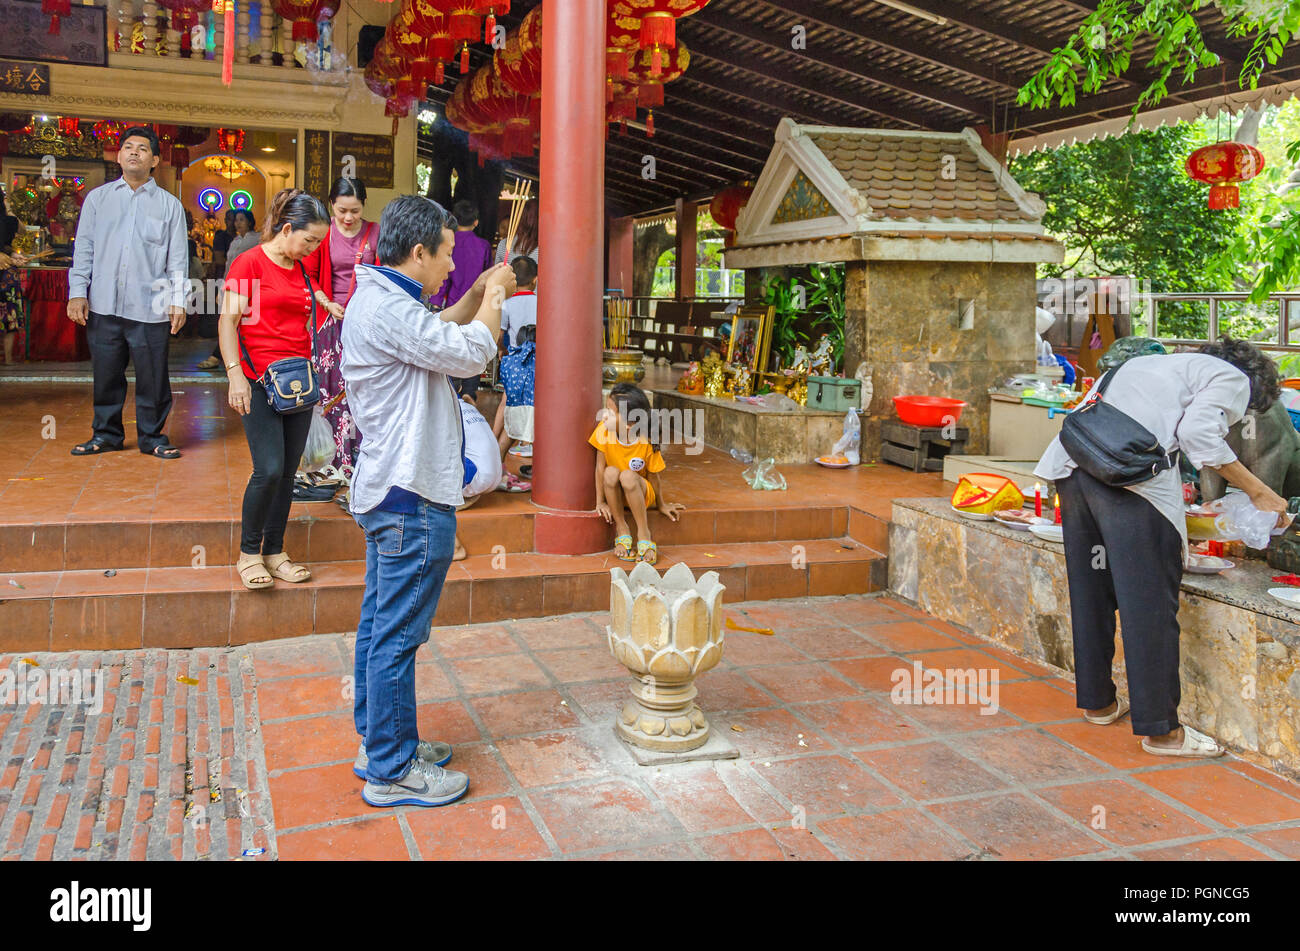 Phnom Penh, Cambodia - April 8, 2018: Devout  buddhists practicing their rituals in the Pagoda of Wat Phnom (Mountain Pagoda), the central point of Ph Stock Photo